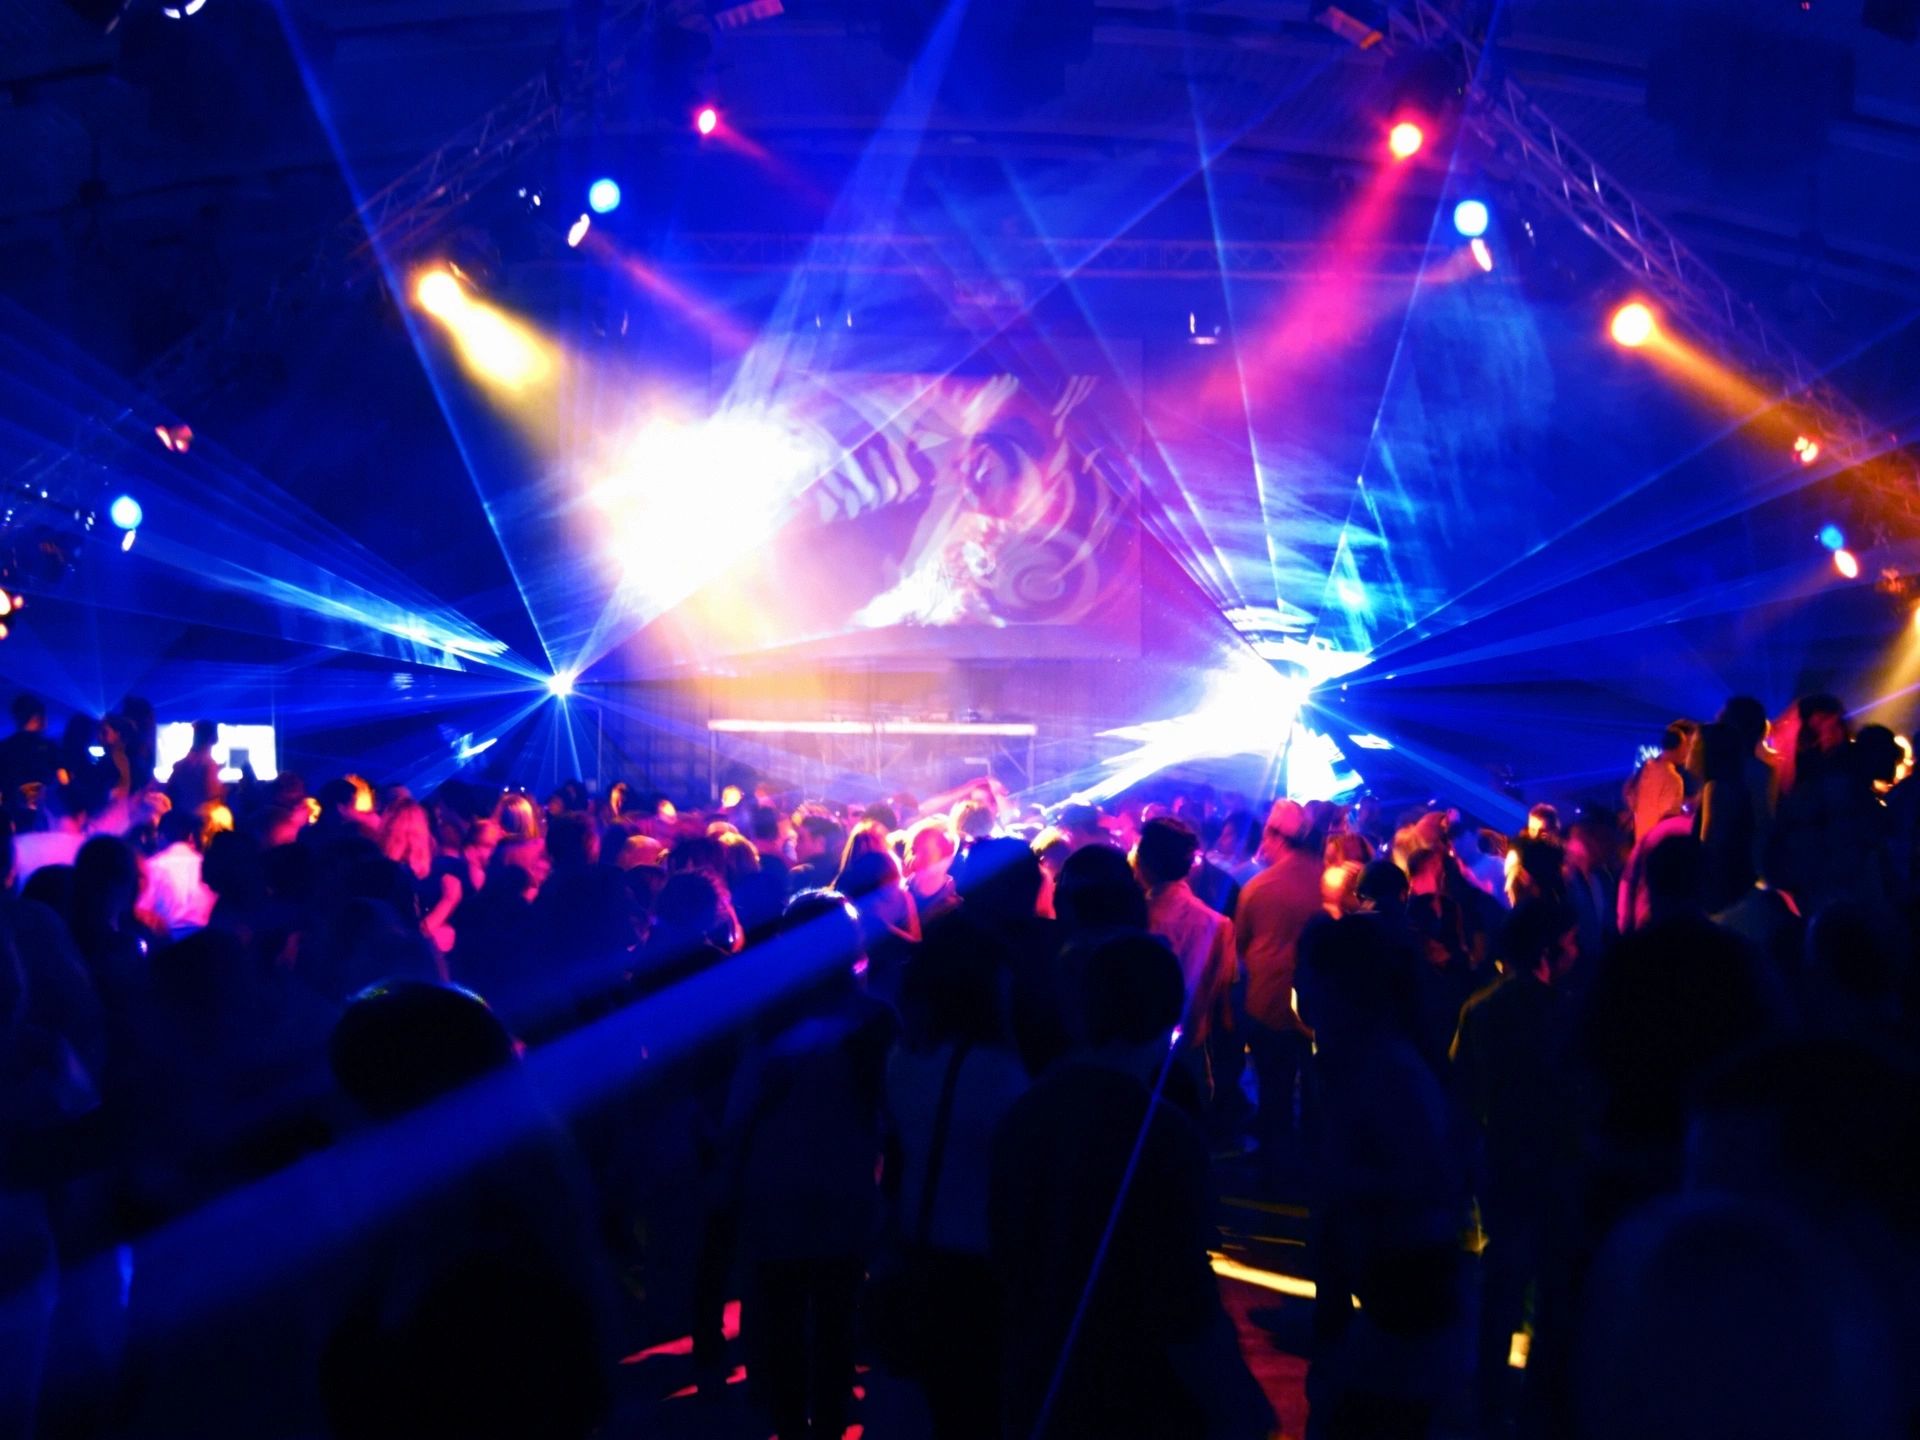 dance floor with dramatic, colorful spotlights and silhouettes of people dancing